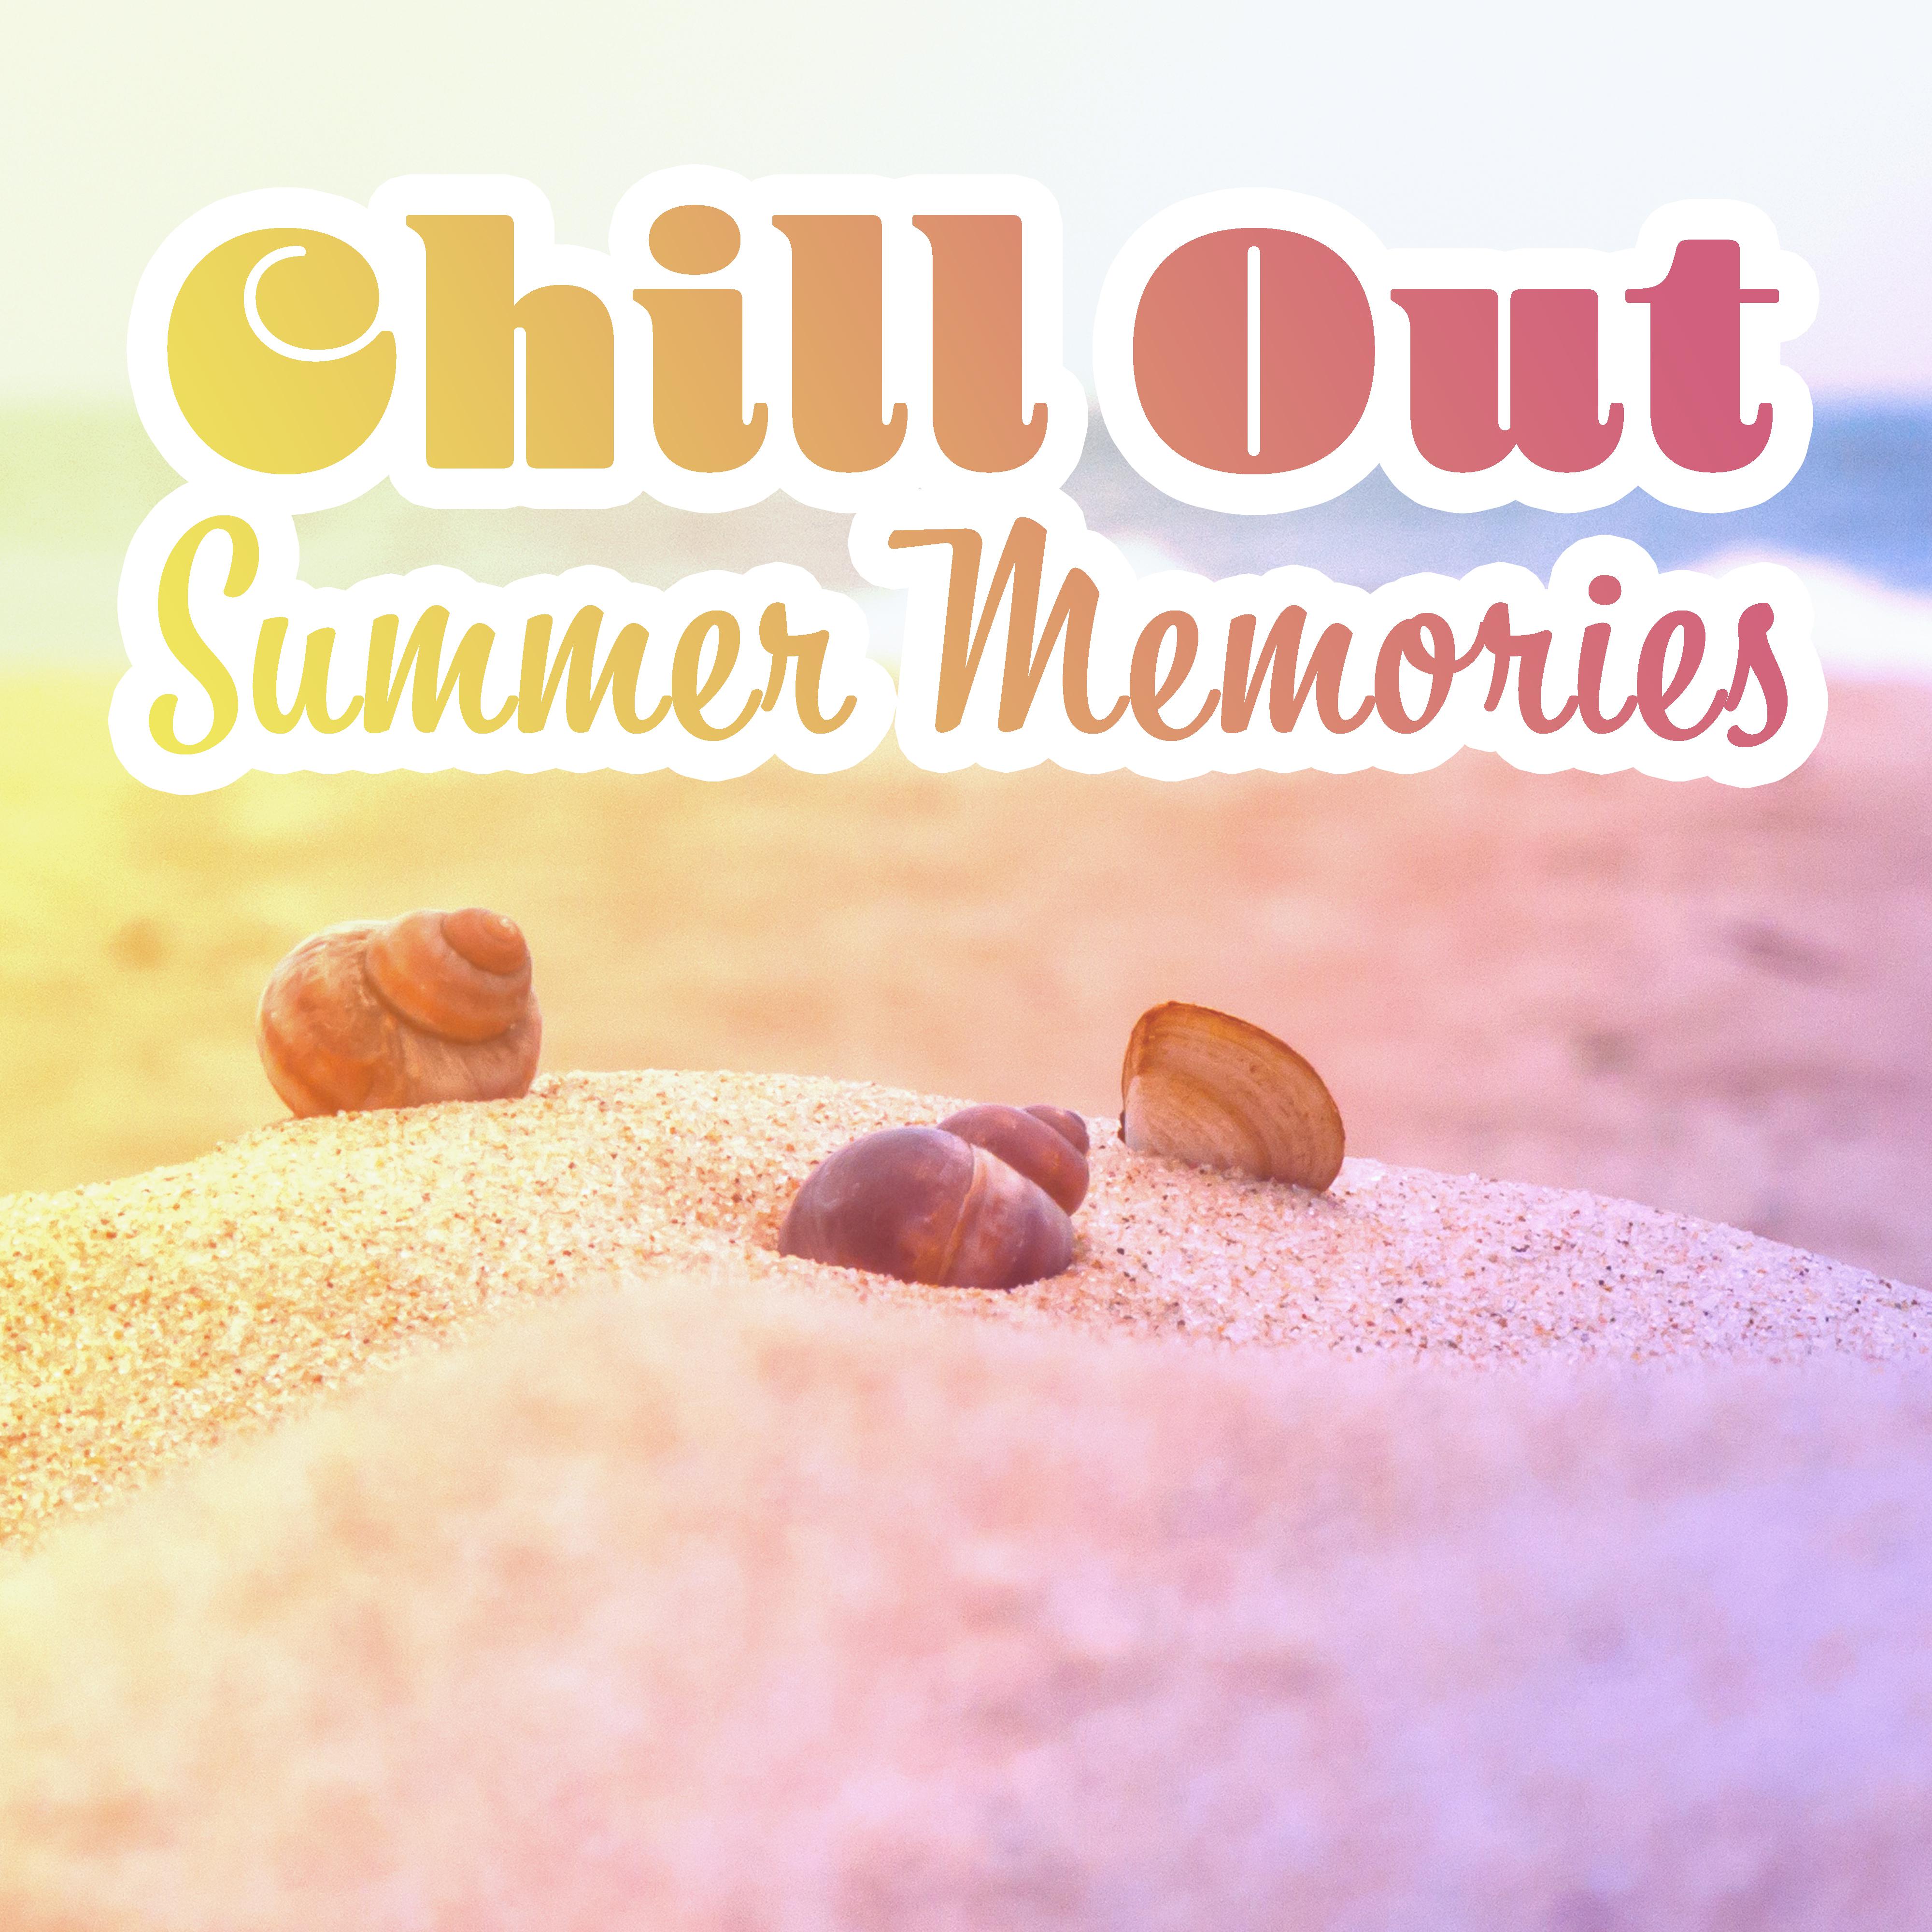 Chill Out Summer Memories  Easy Listening, Peaceful Vibes, Tropical Island Melodies, Chill Out Beats